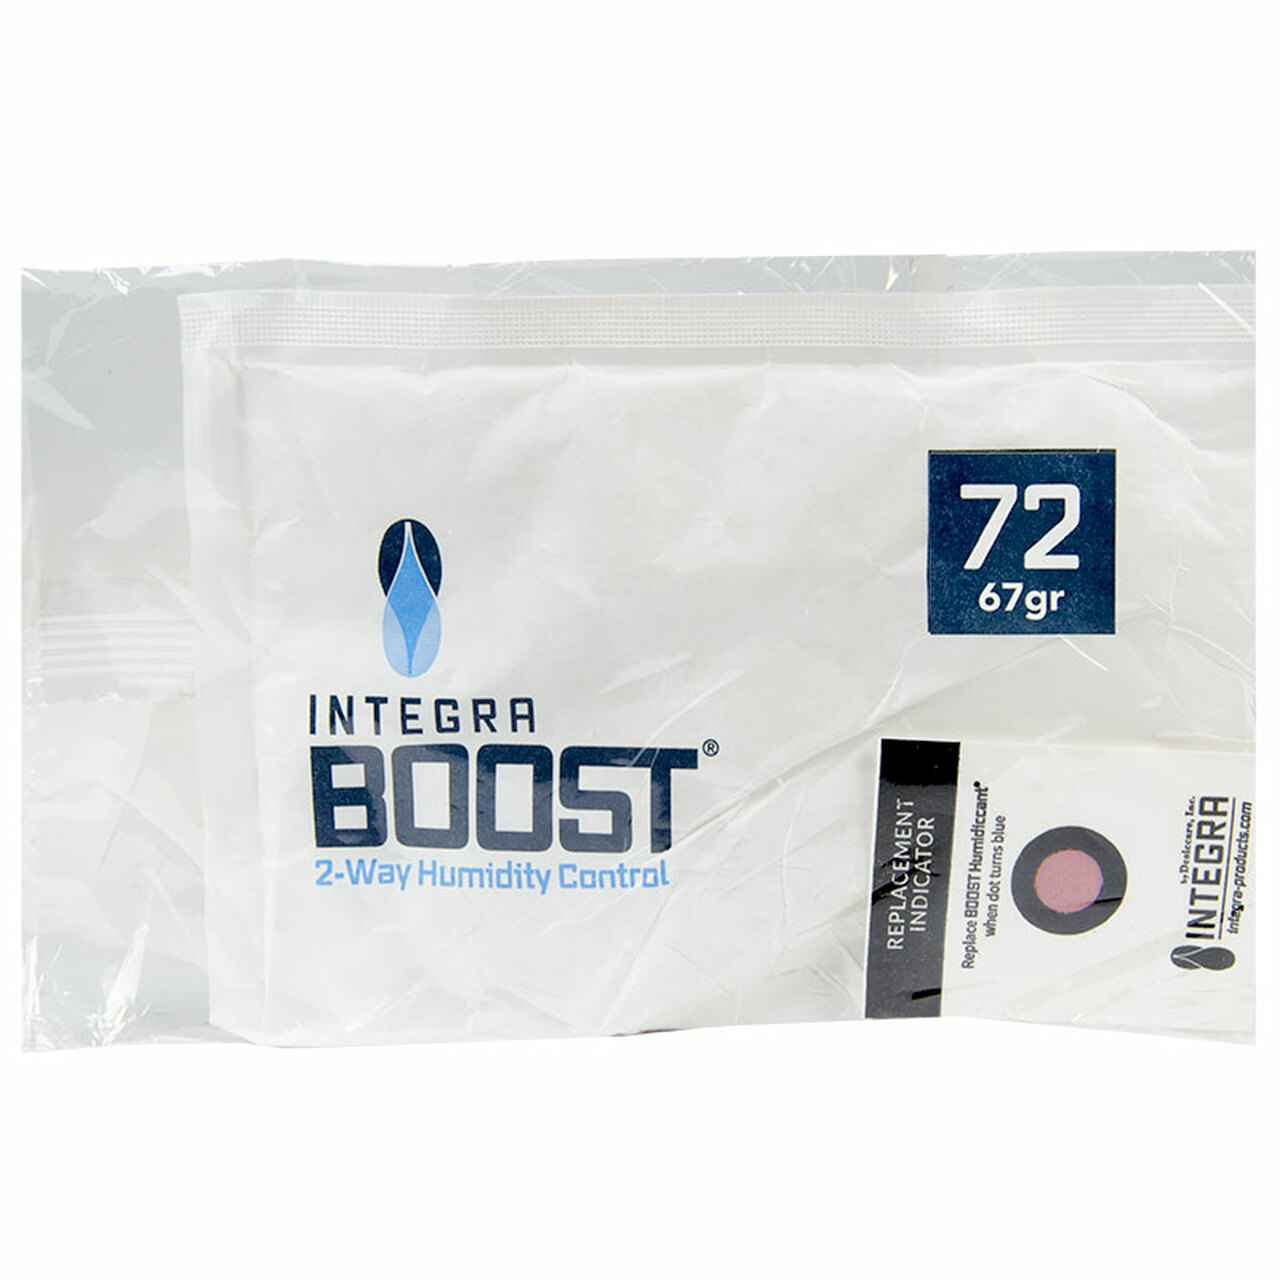 Desiccare Integra BOOST® 67 gram 72% RH retail box individually wrapped 2-way humidity control packs with HIC